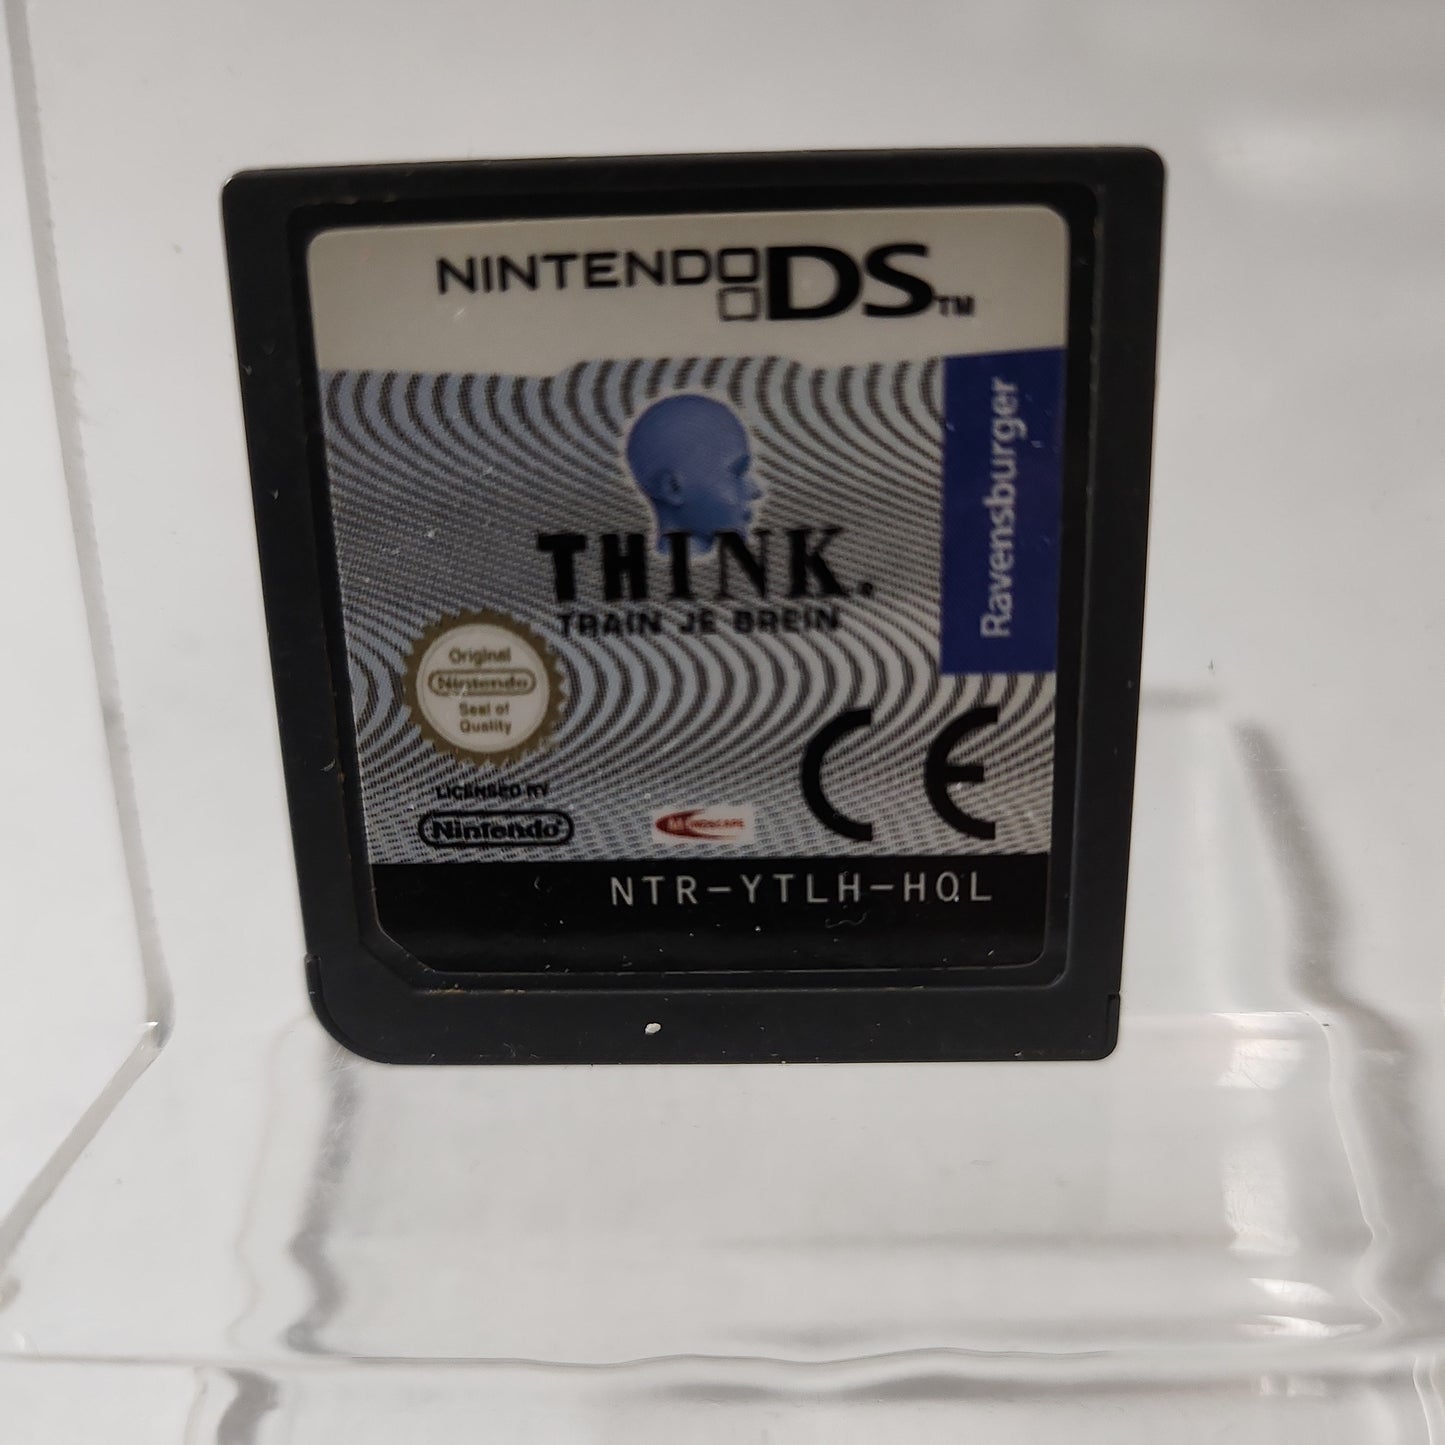 Think "Train je Brein" (Disc Only) Nintendo DS